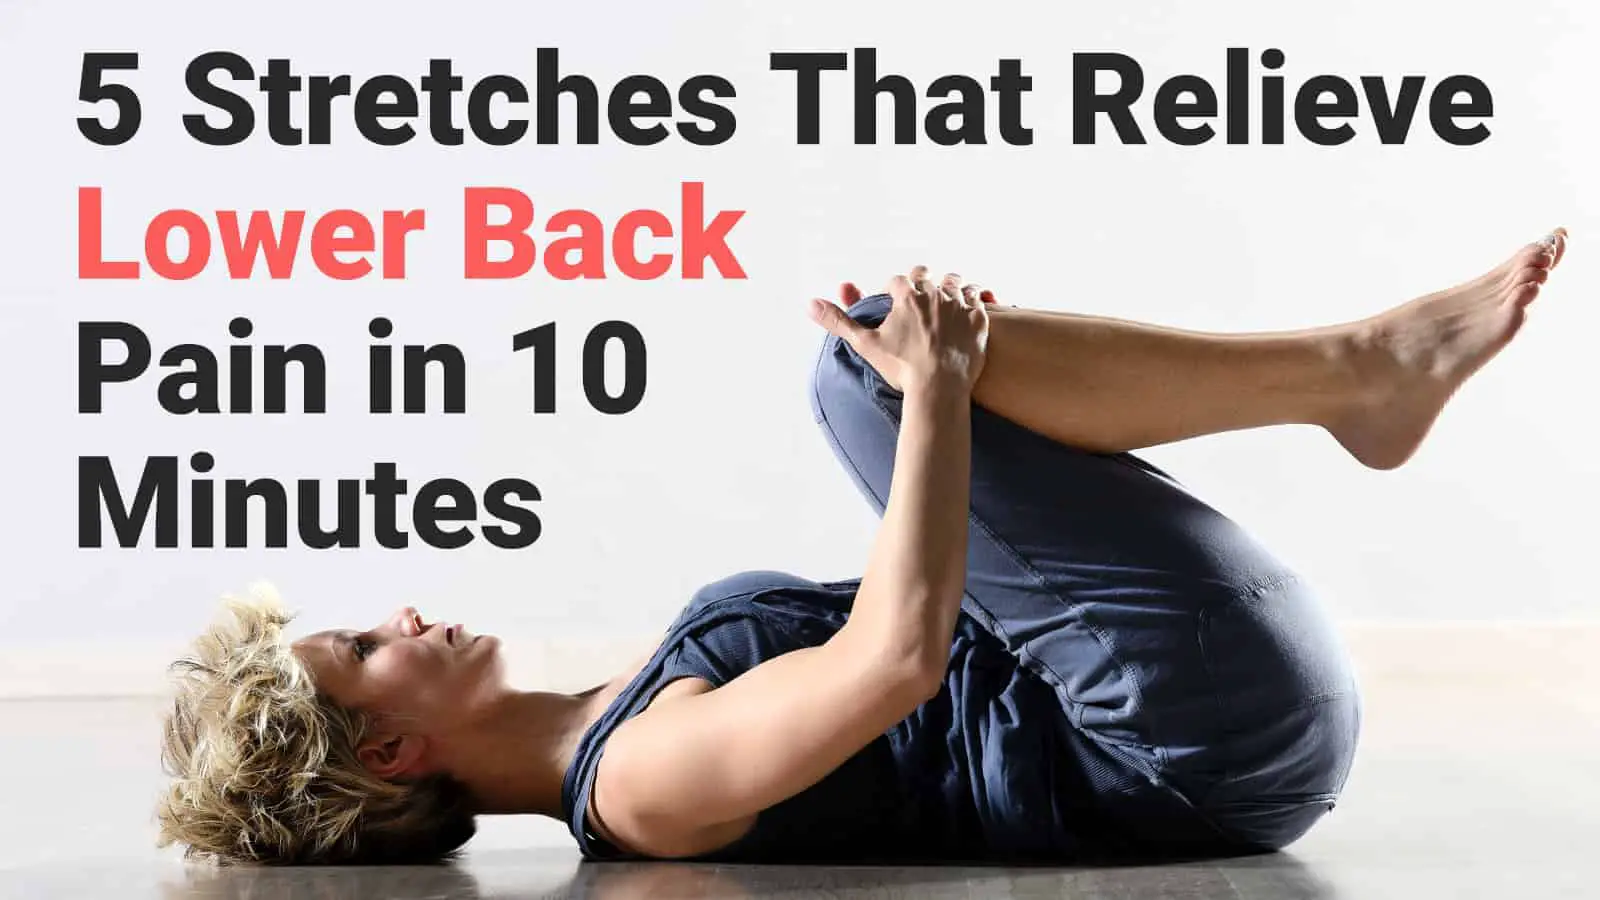 5 Stretches To Prevent and Relieve Lower Back Pain in 10 Minutes